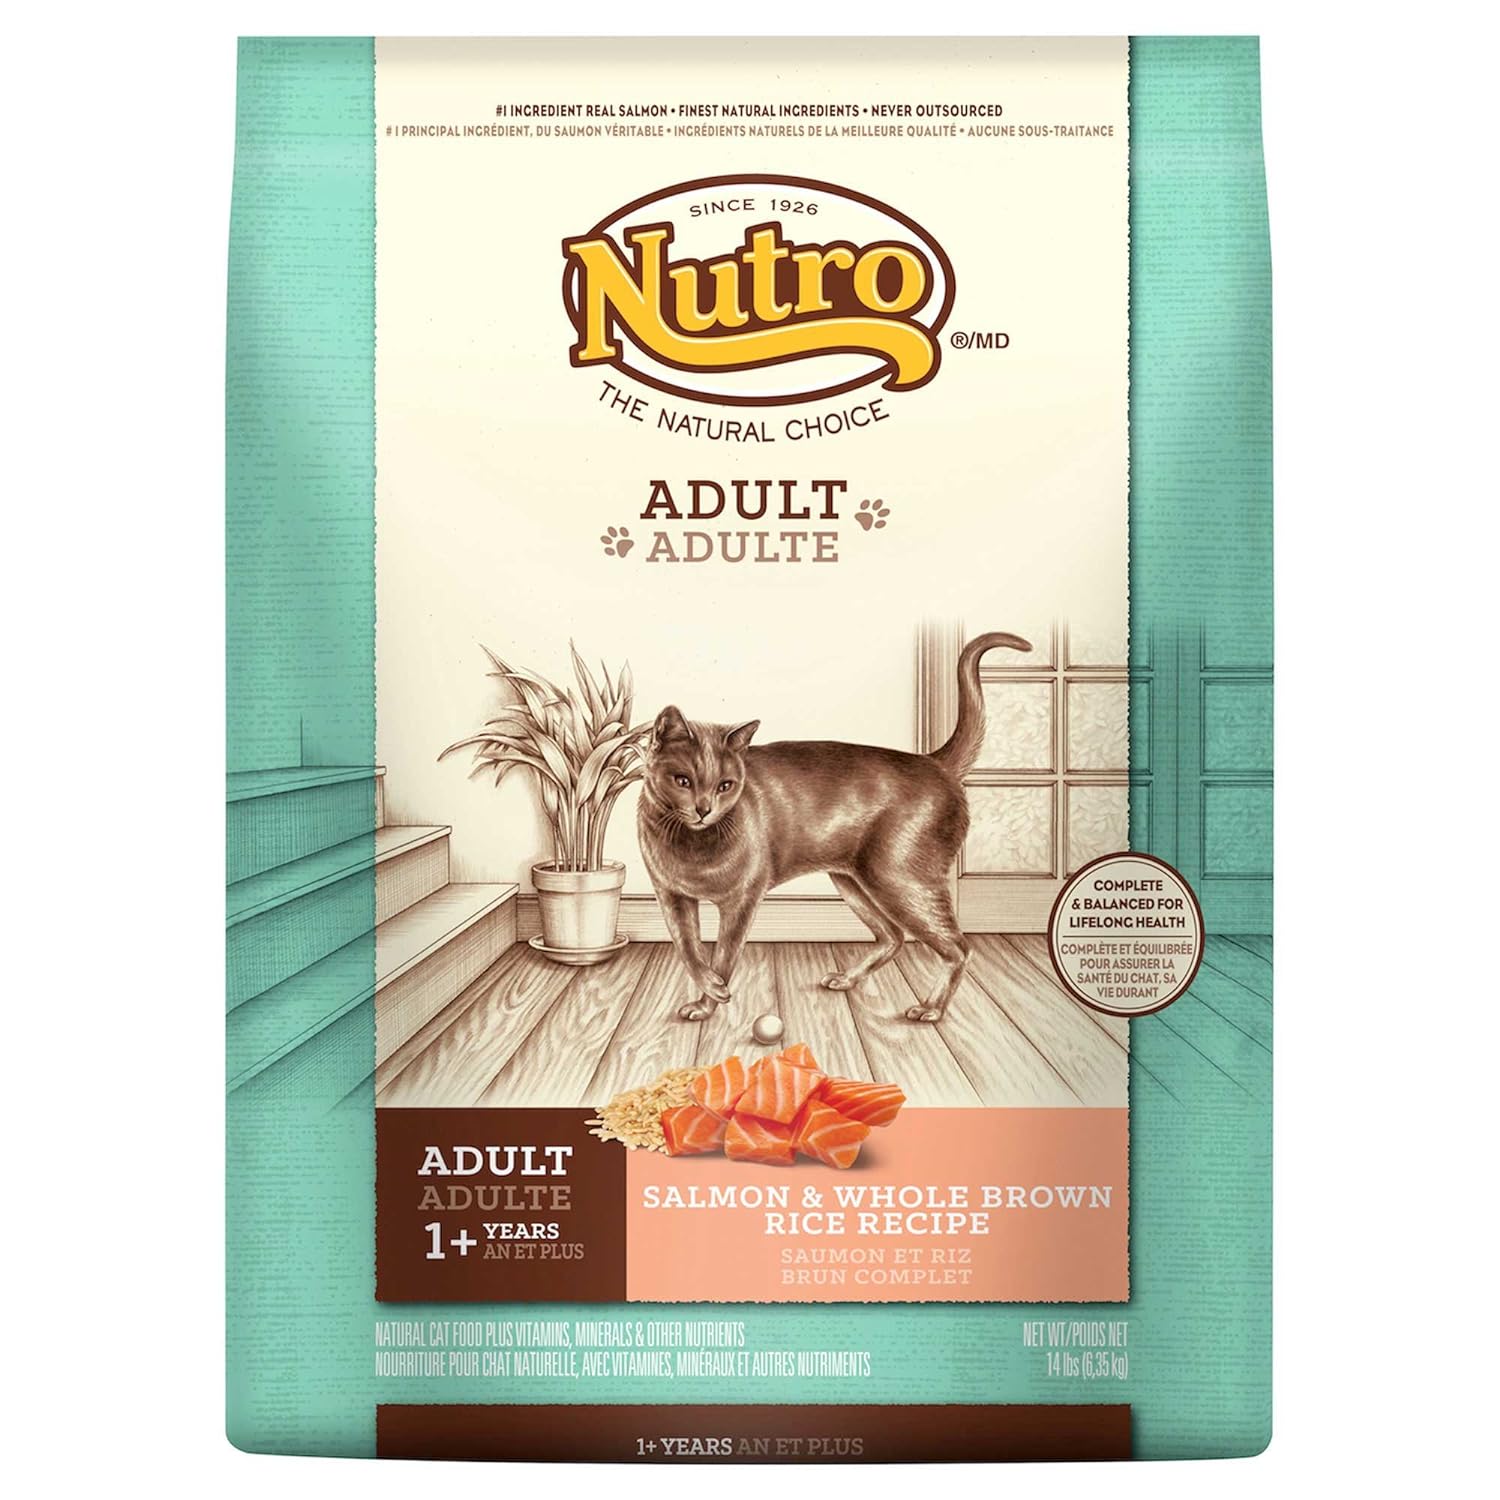 Nutro natural choice adult